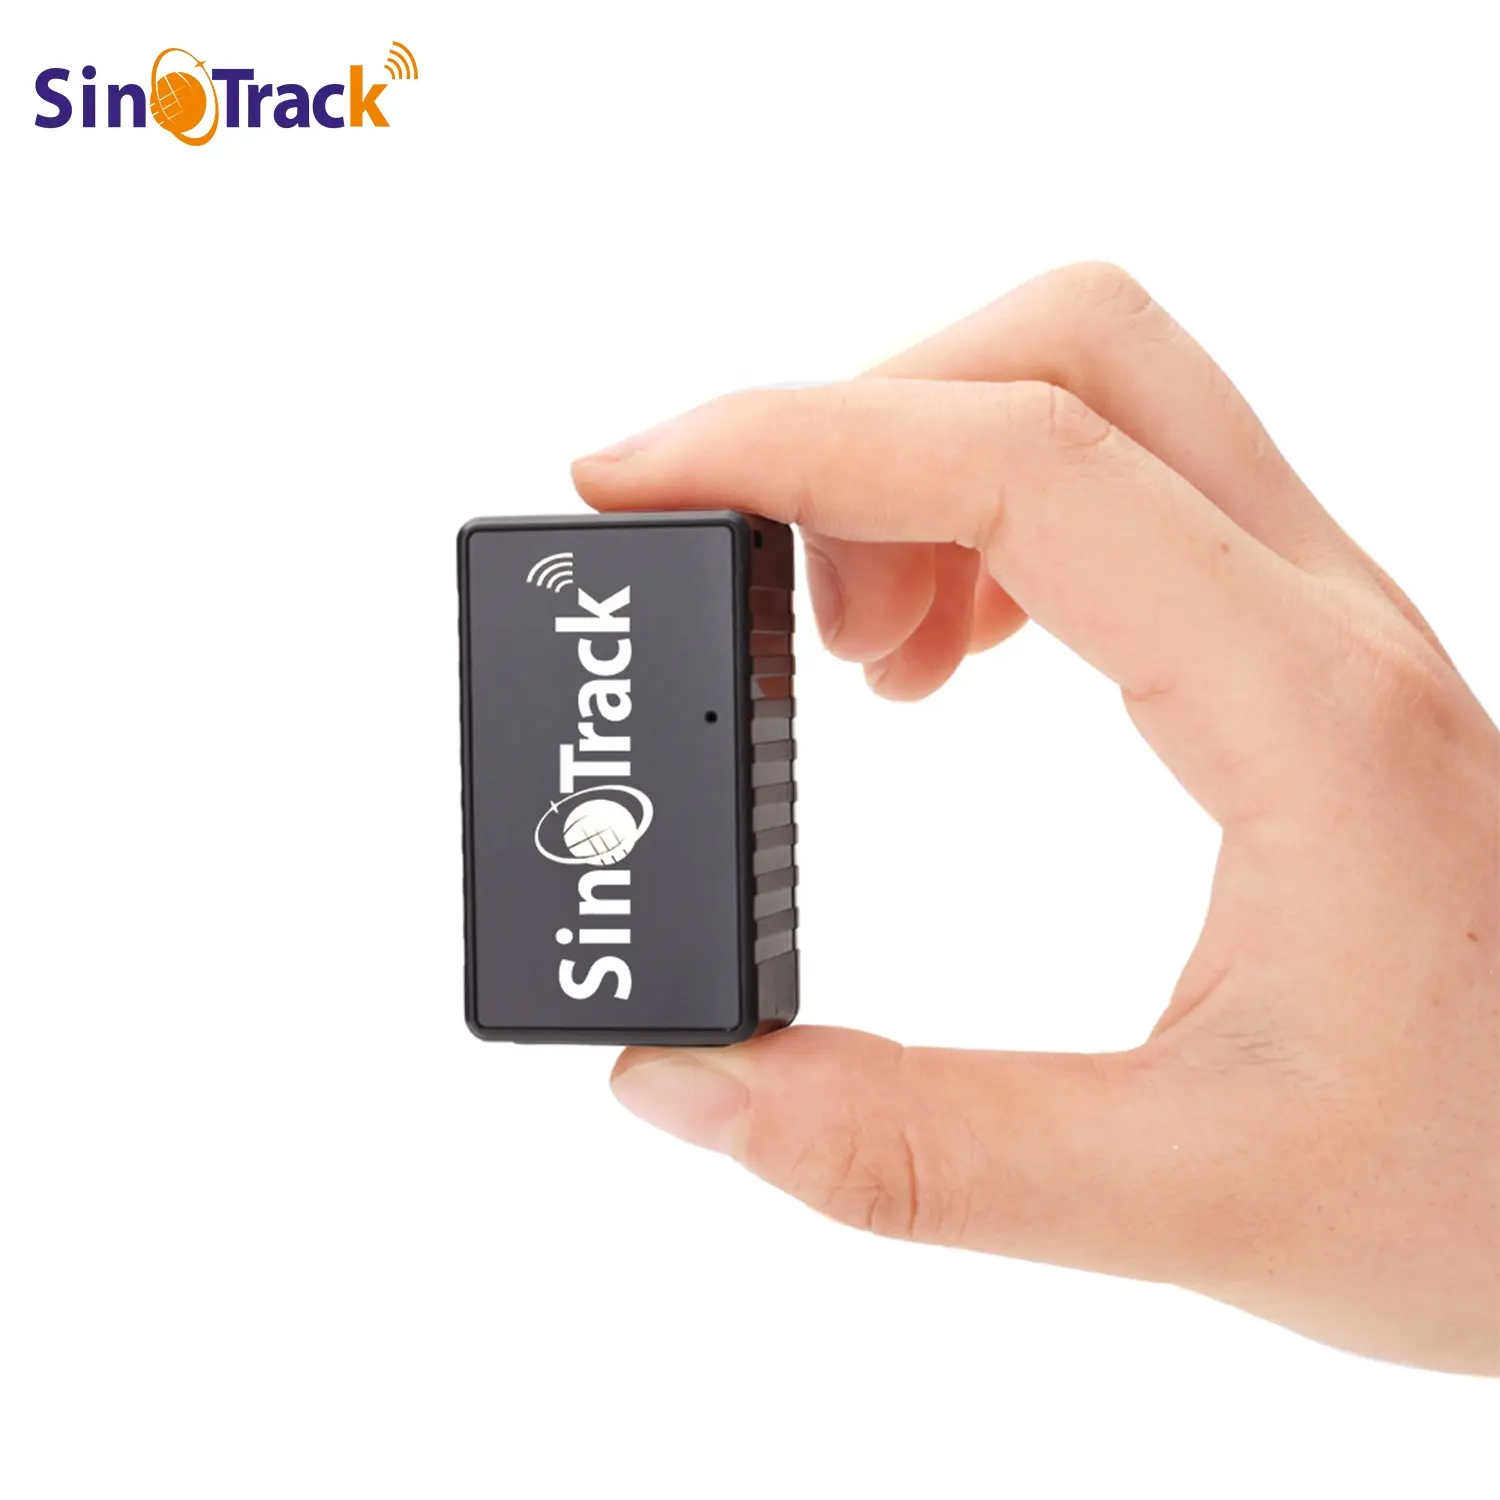 SinoTrack Mini GPS Tracking System ST-903 Wireless Portable Small GPS Personal Vehicle Tracking Device